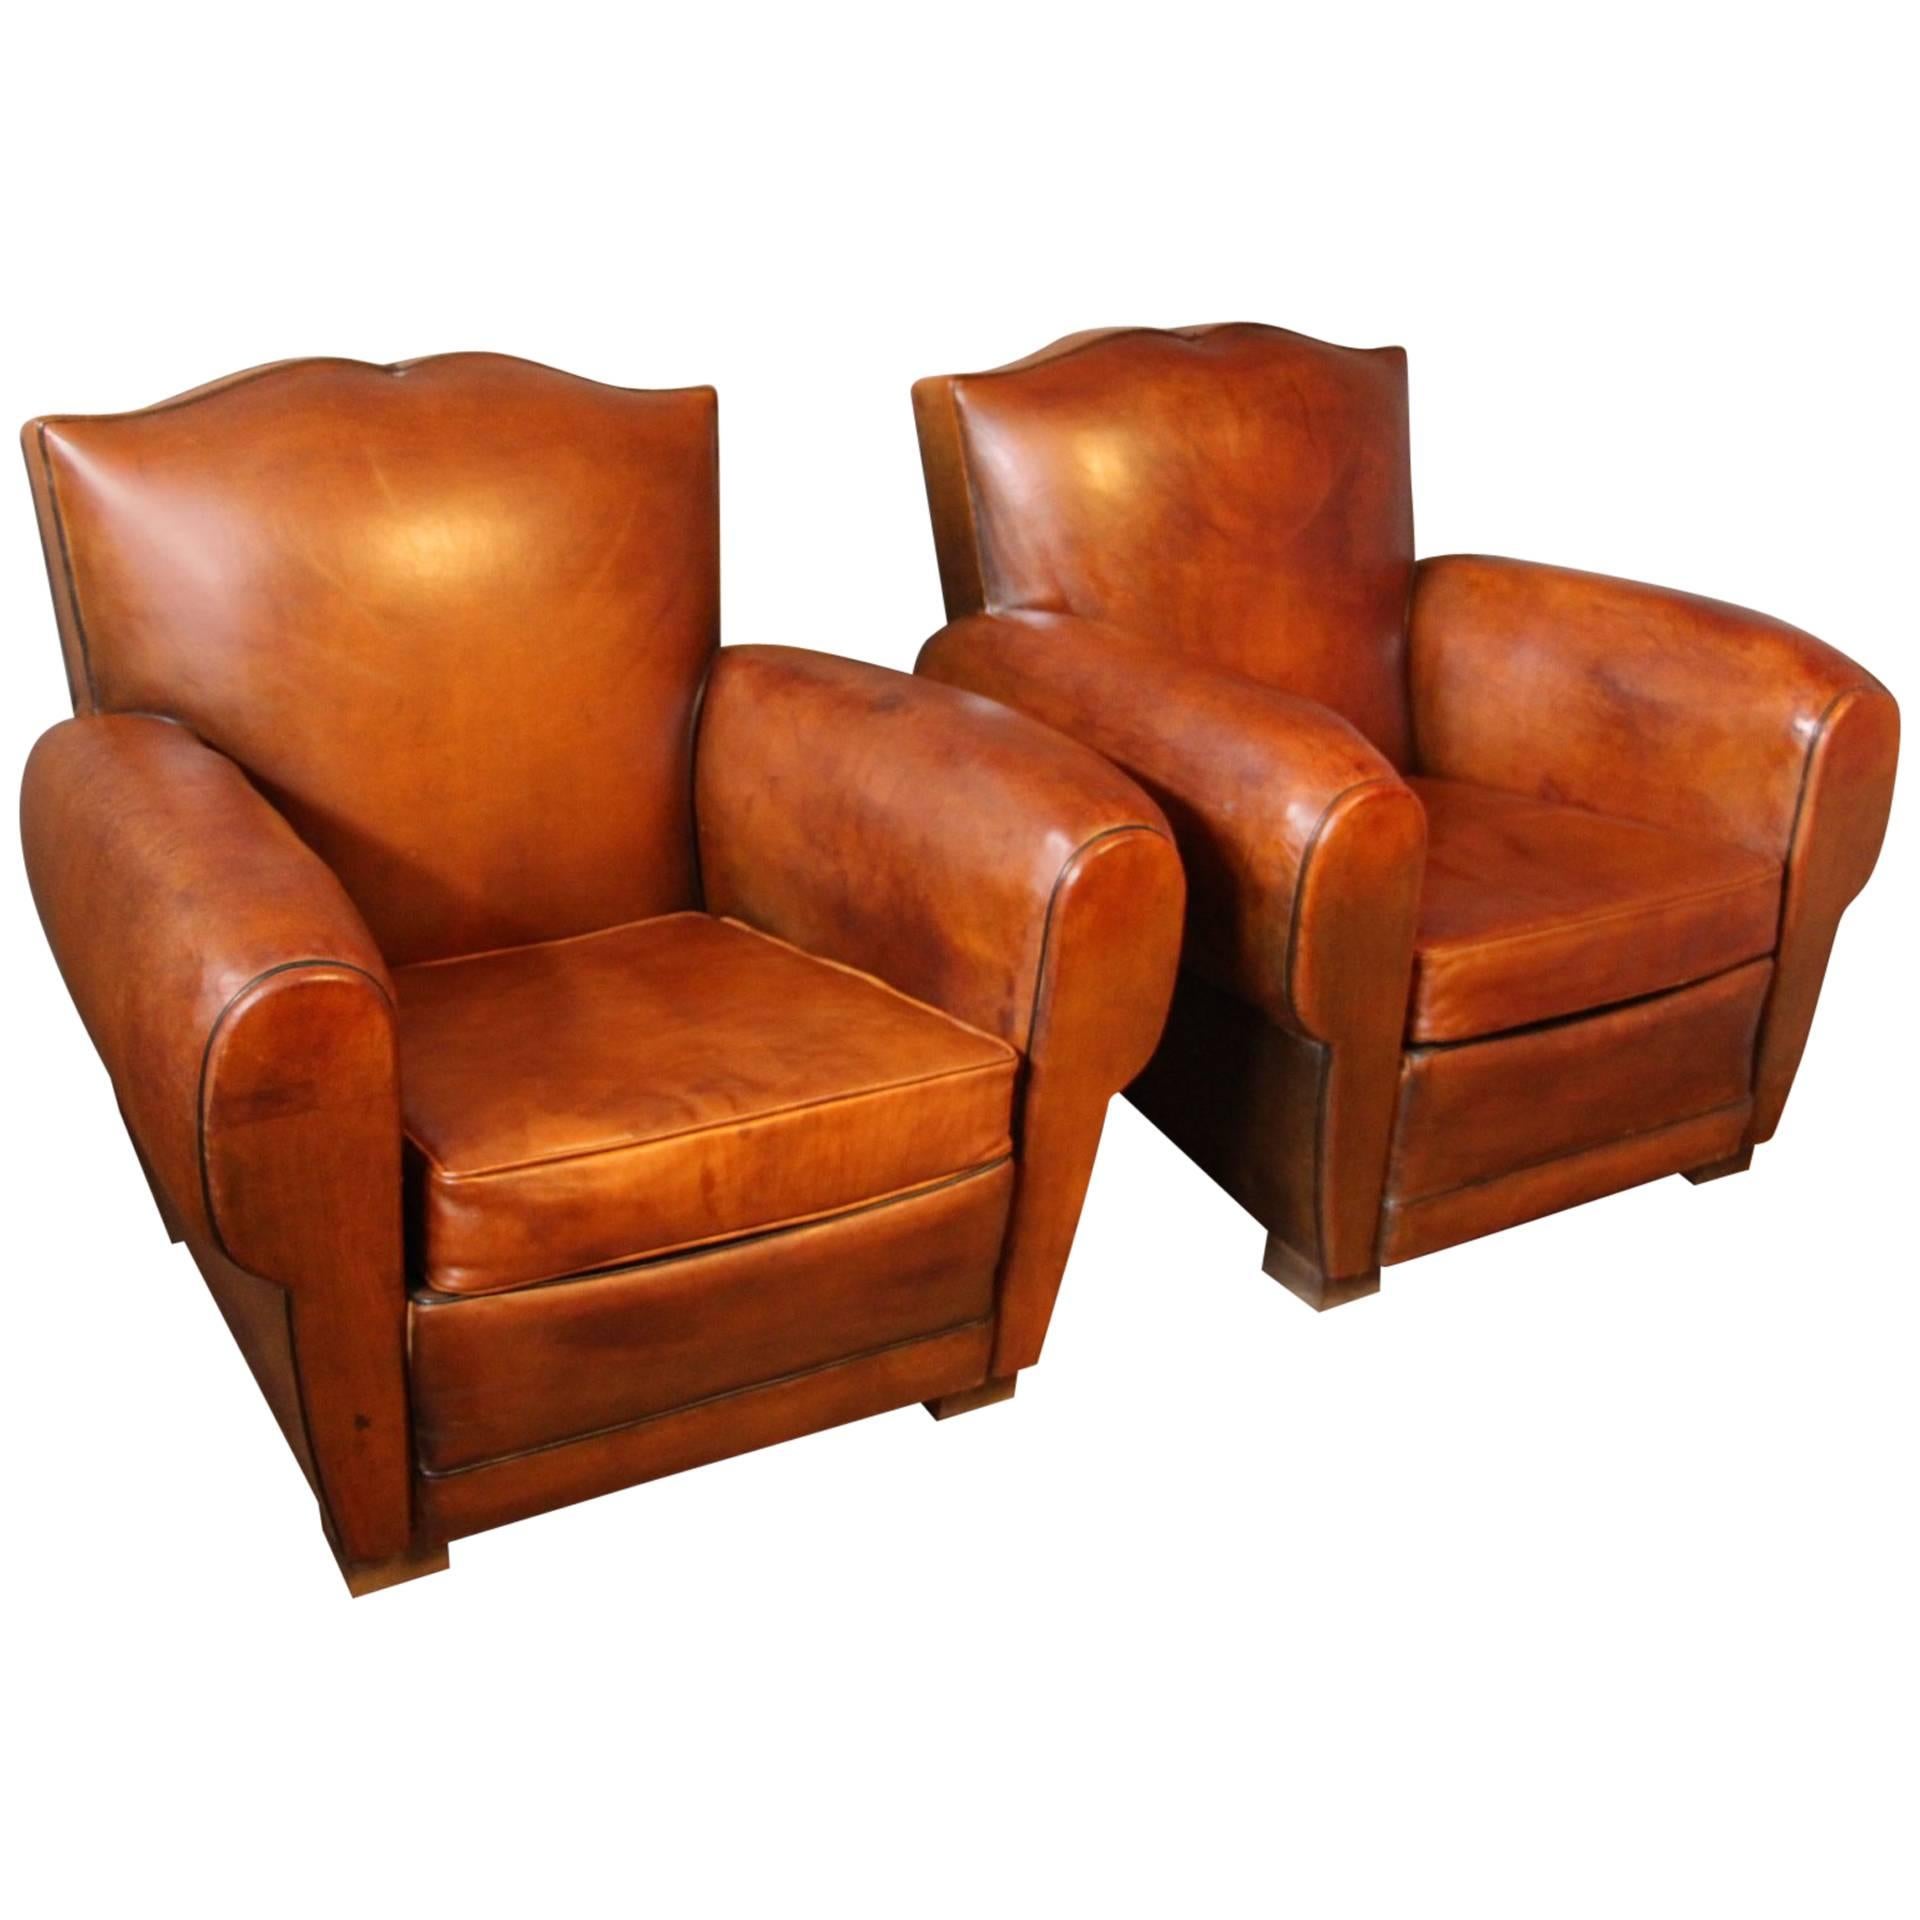 Pair of 1930s French Leather Club Chairs, Mustache Back